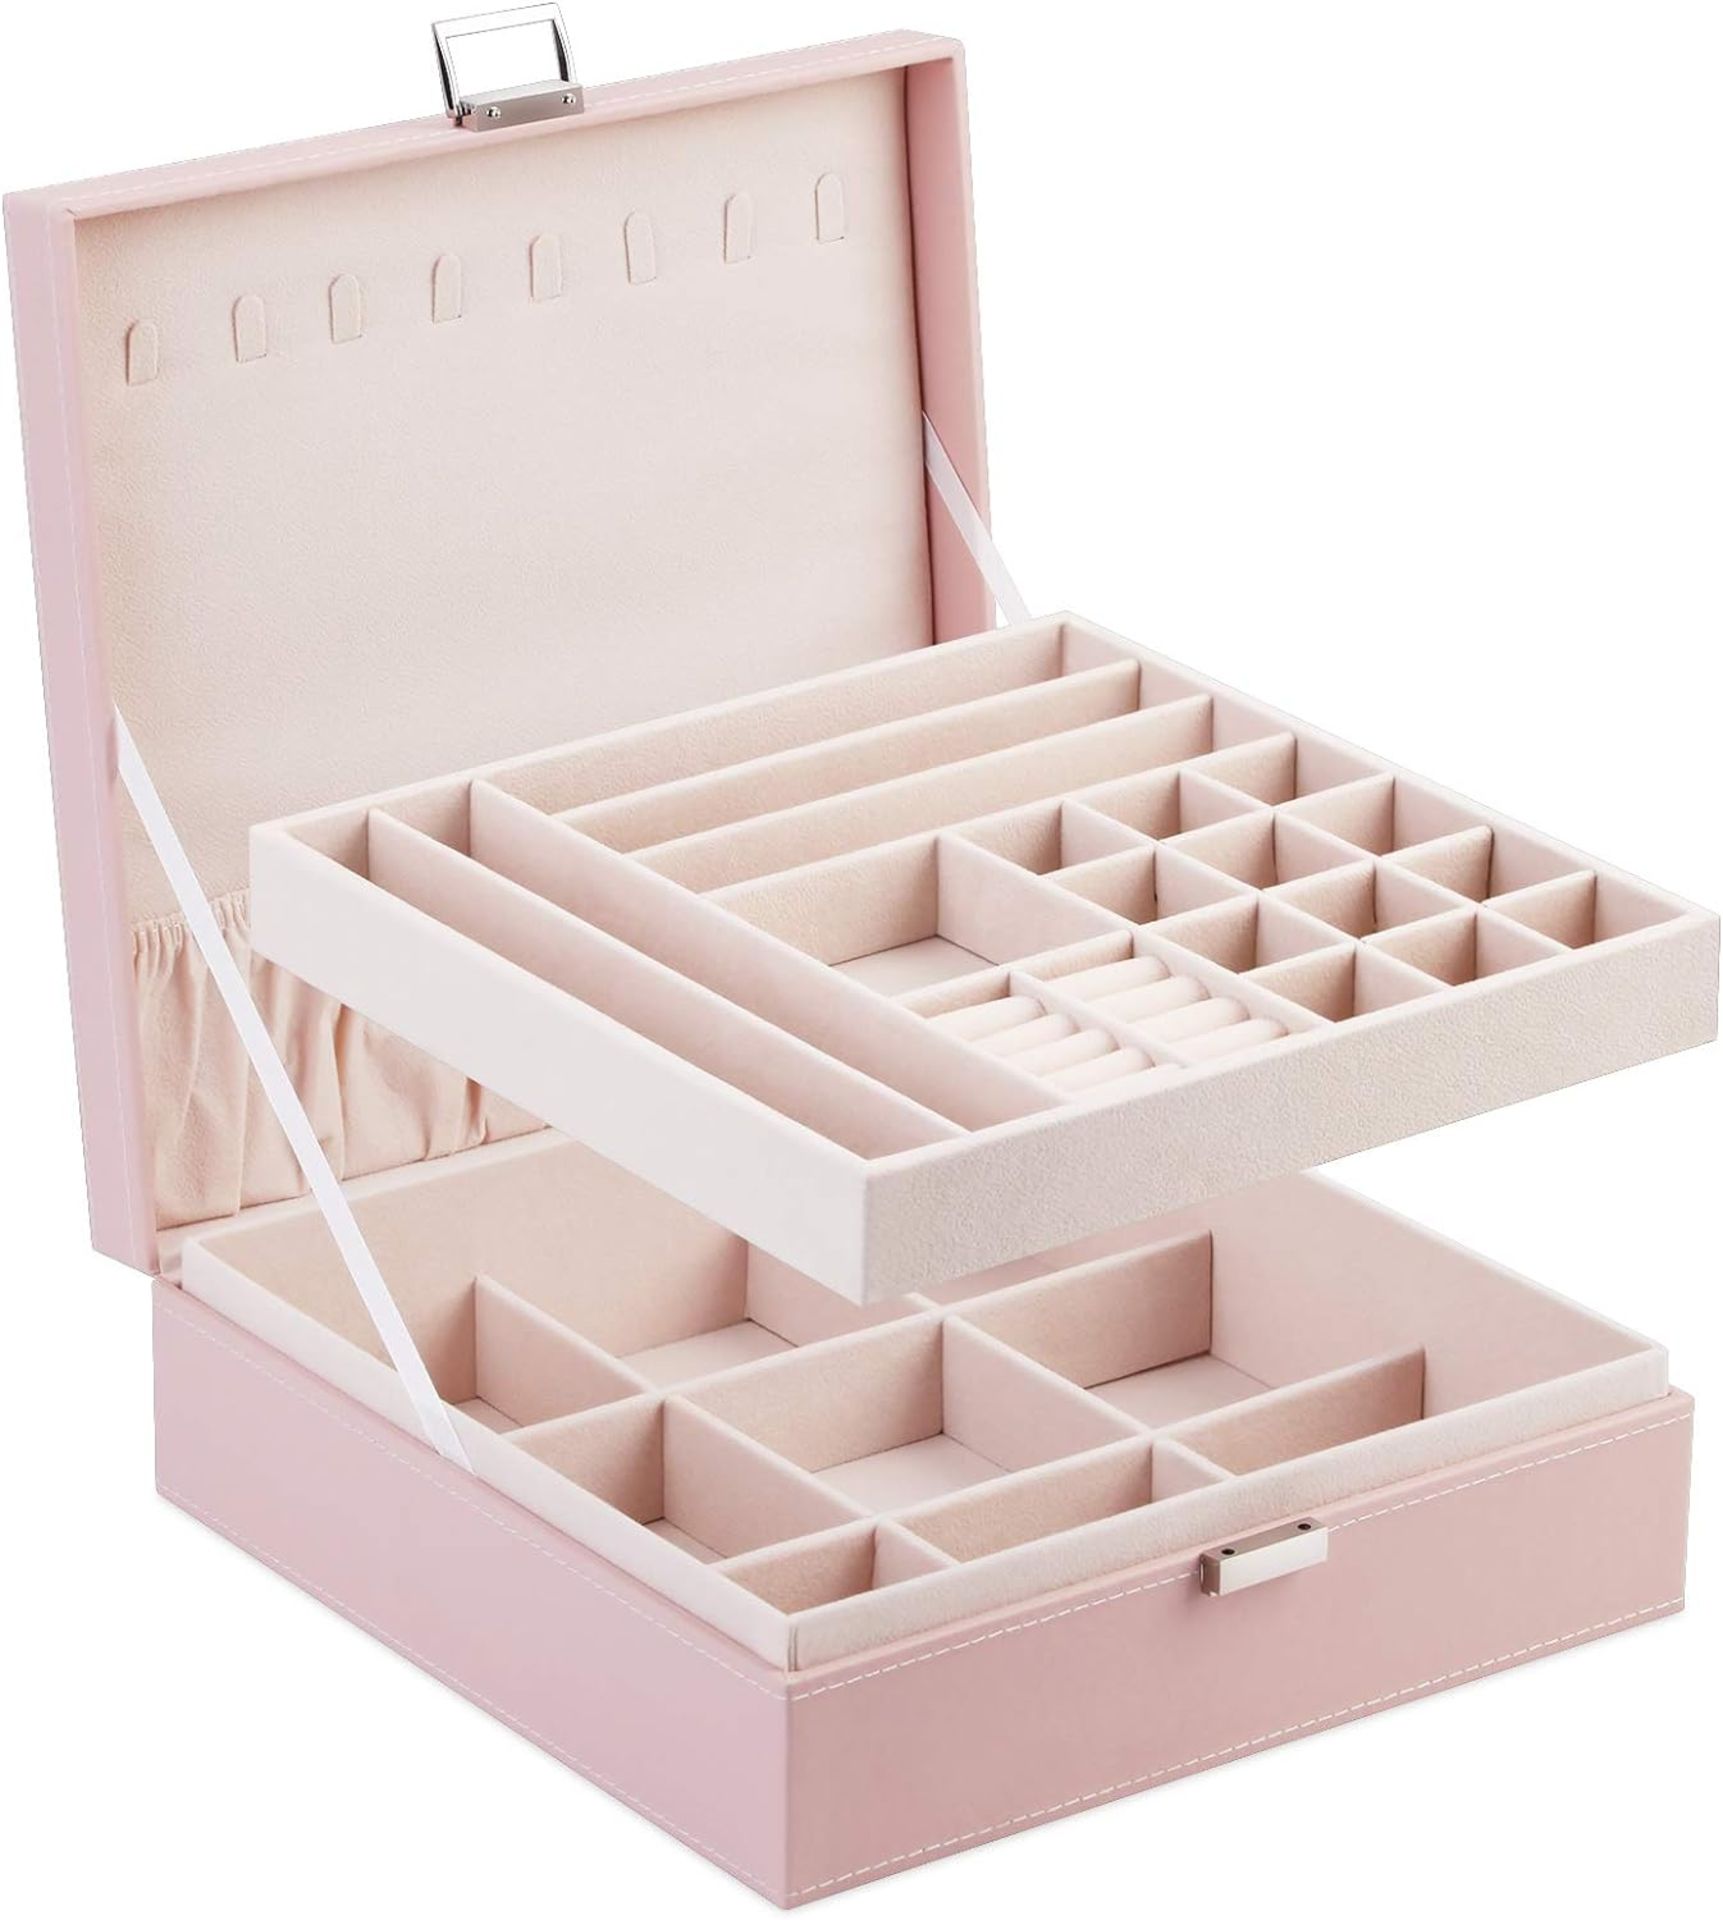 Approx RRP £100, Collection of Bedroom Organisers, 10 Pieces - Image 2 of 3